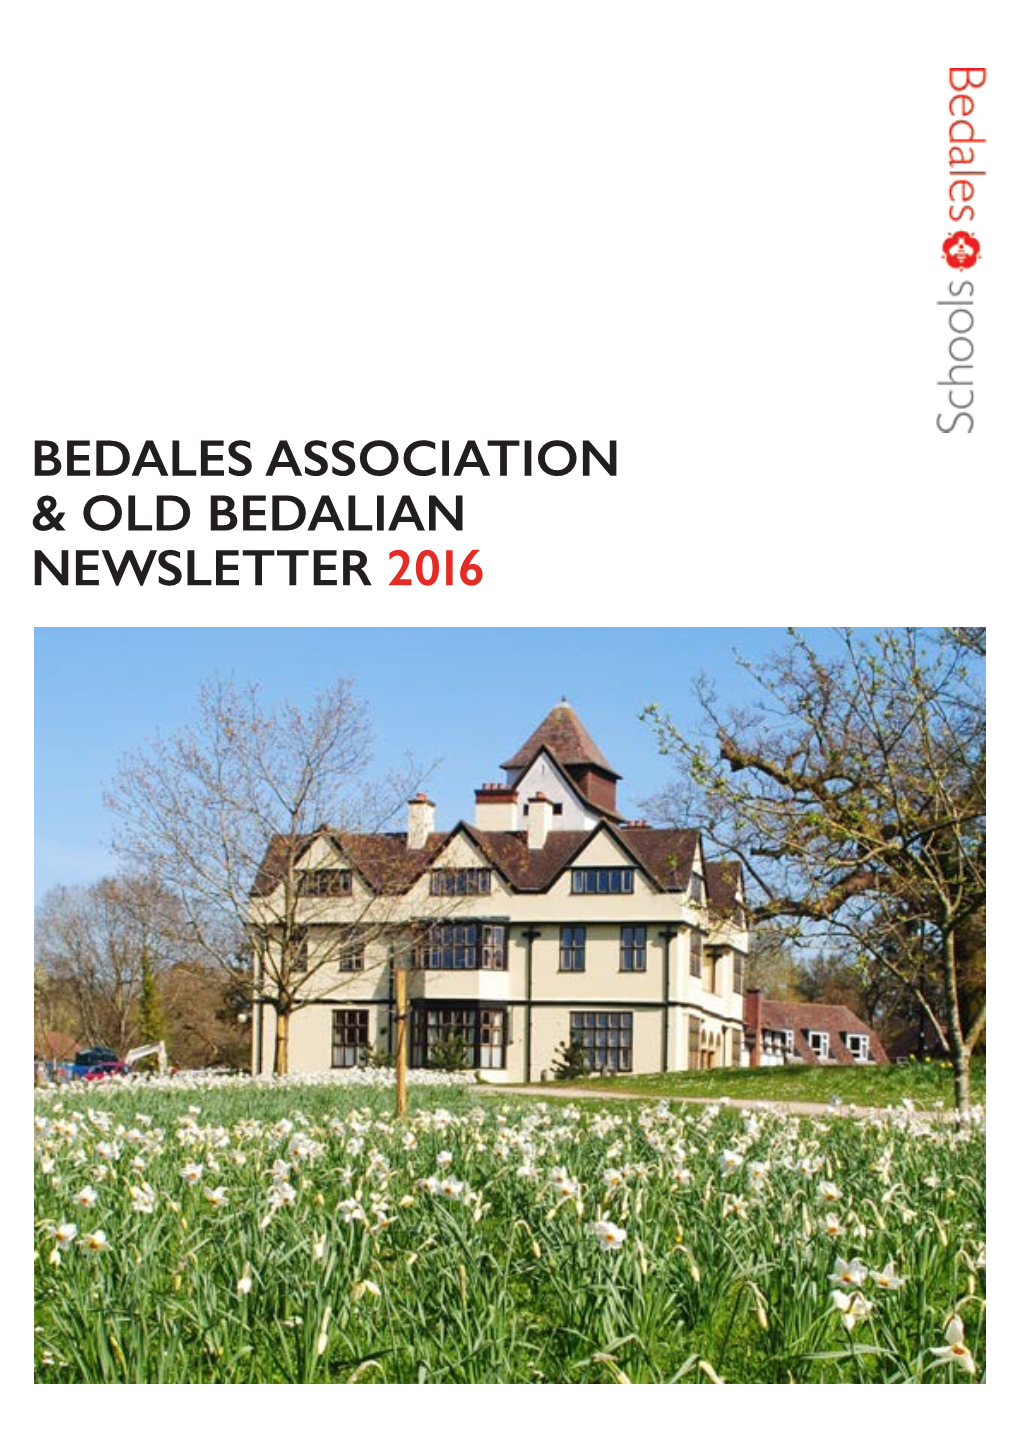 Bedales Association and Old Bedalian Newsletter, 2016